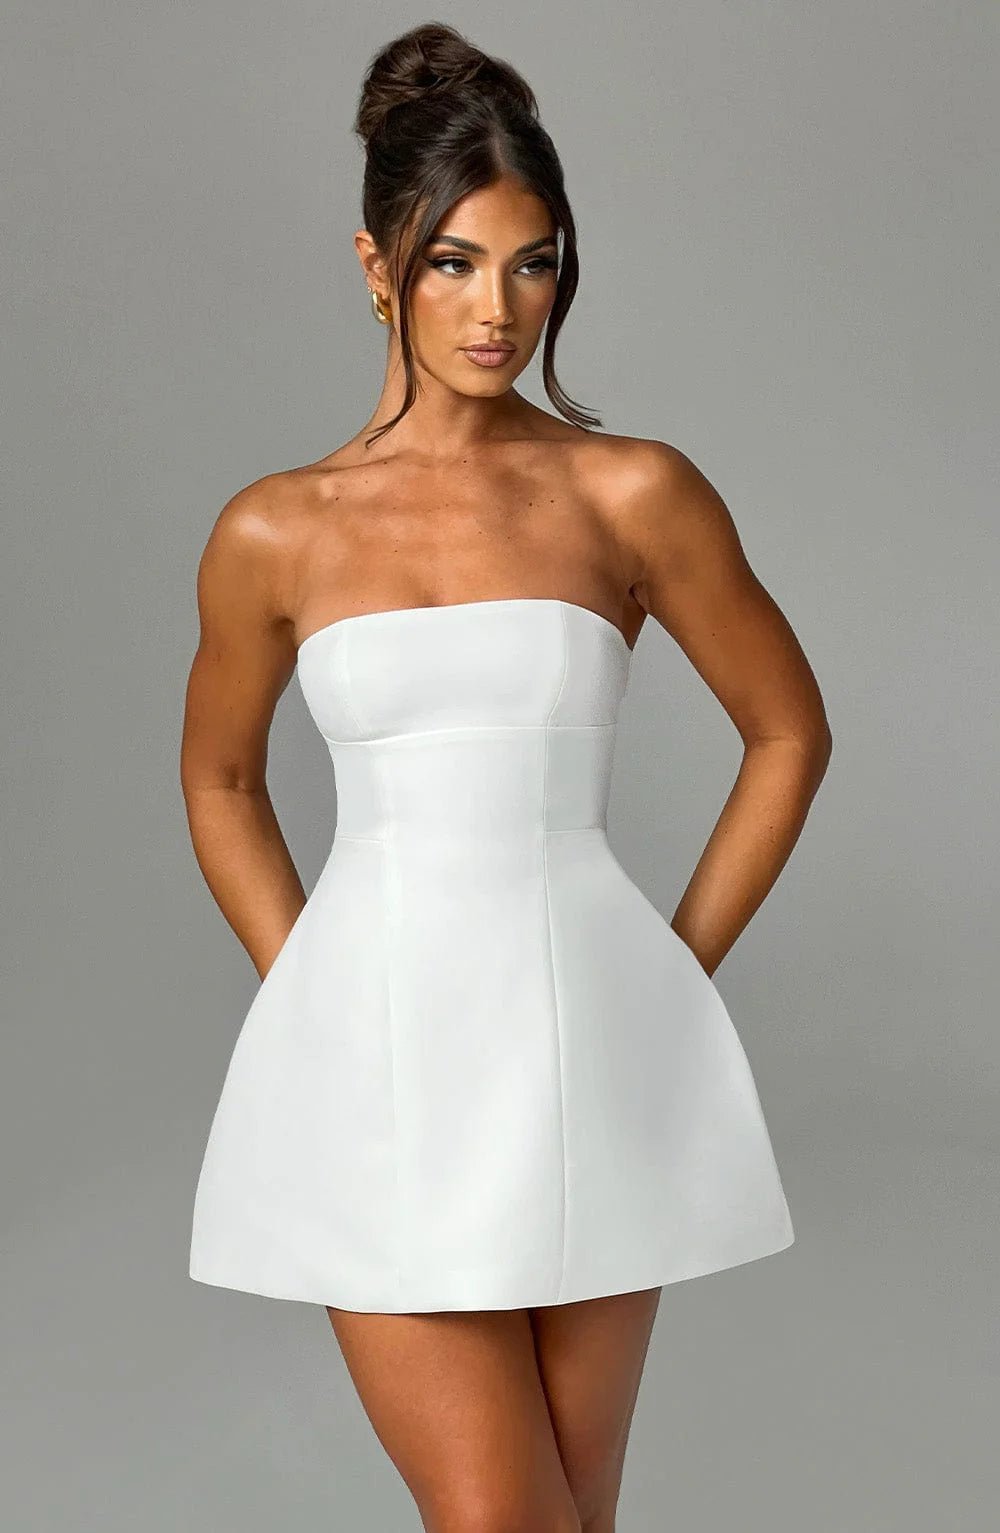 Mini Dress-Ivory - Buy two and get free shipping! mysite